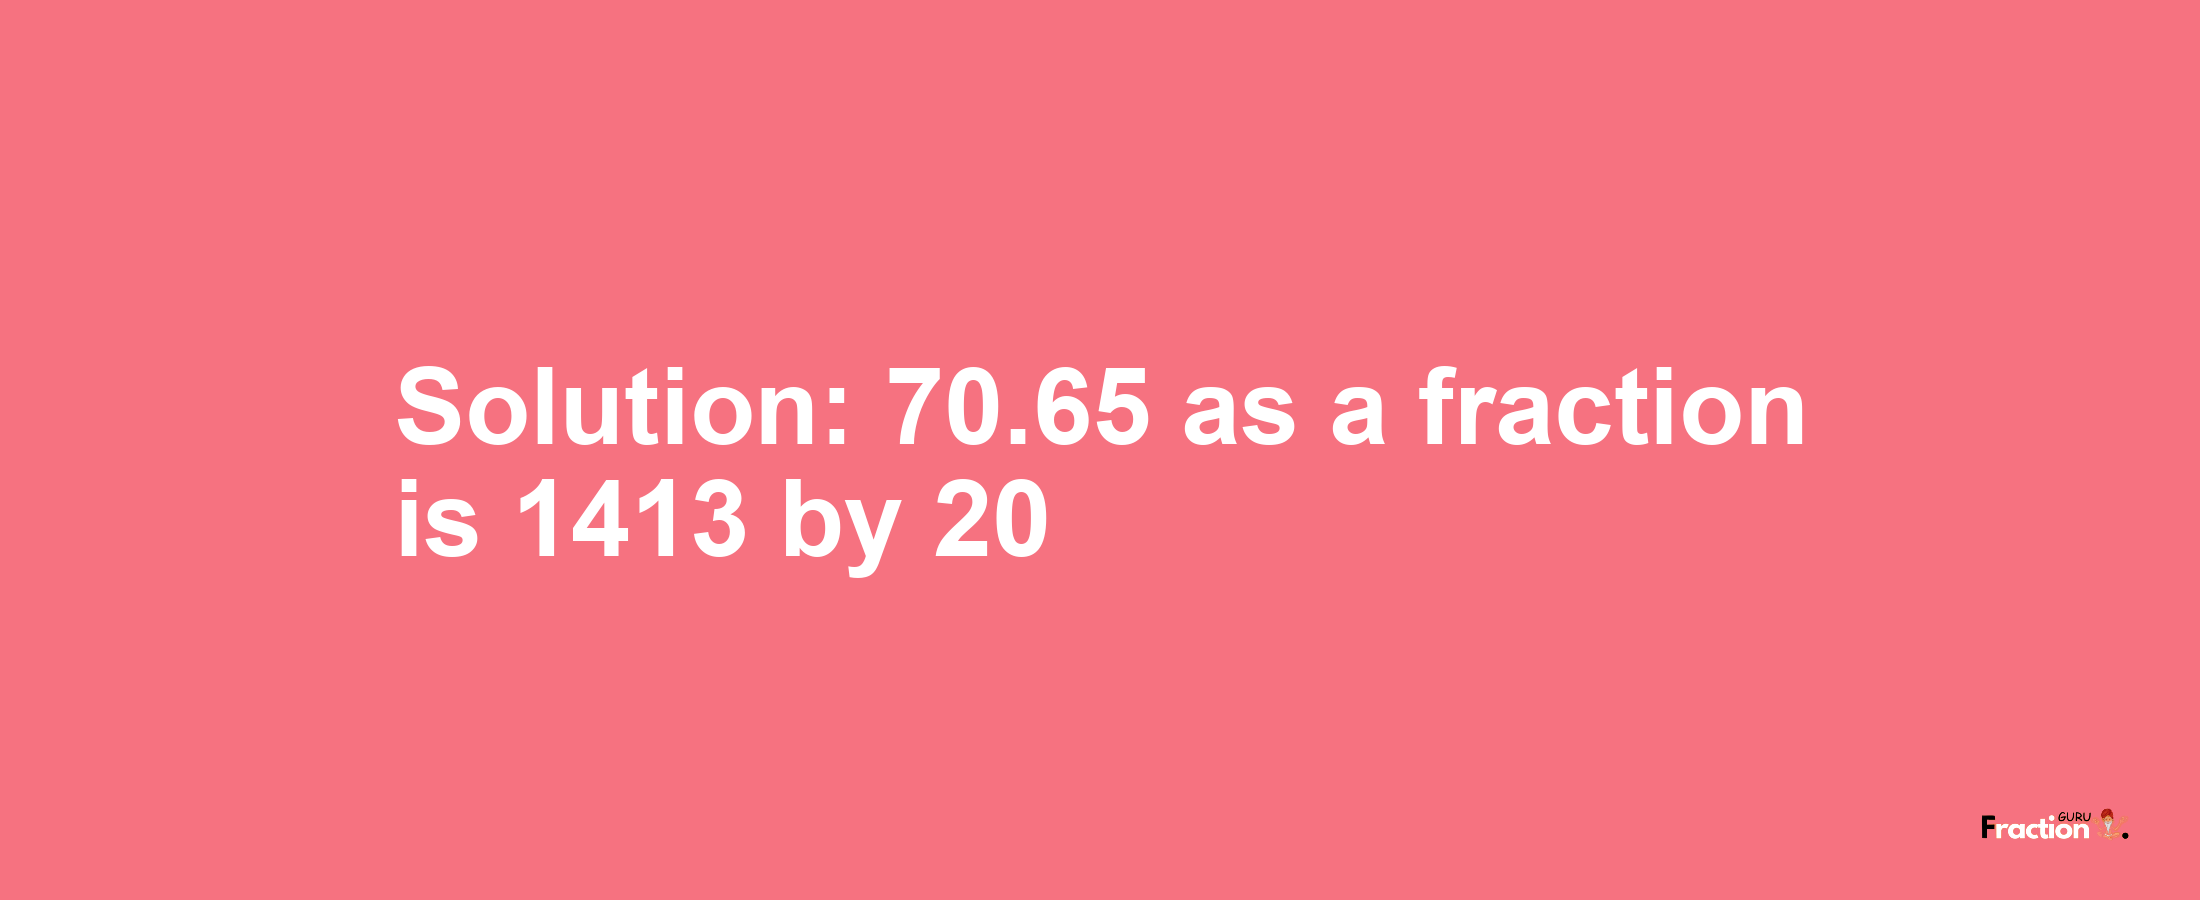 Solution:70.65 as a fraction is 1413/20